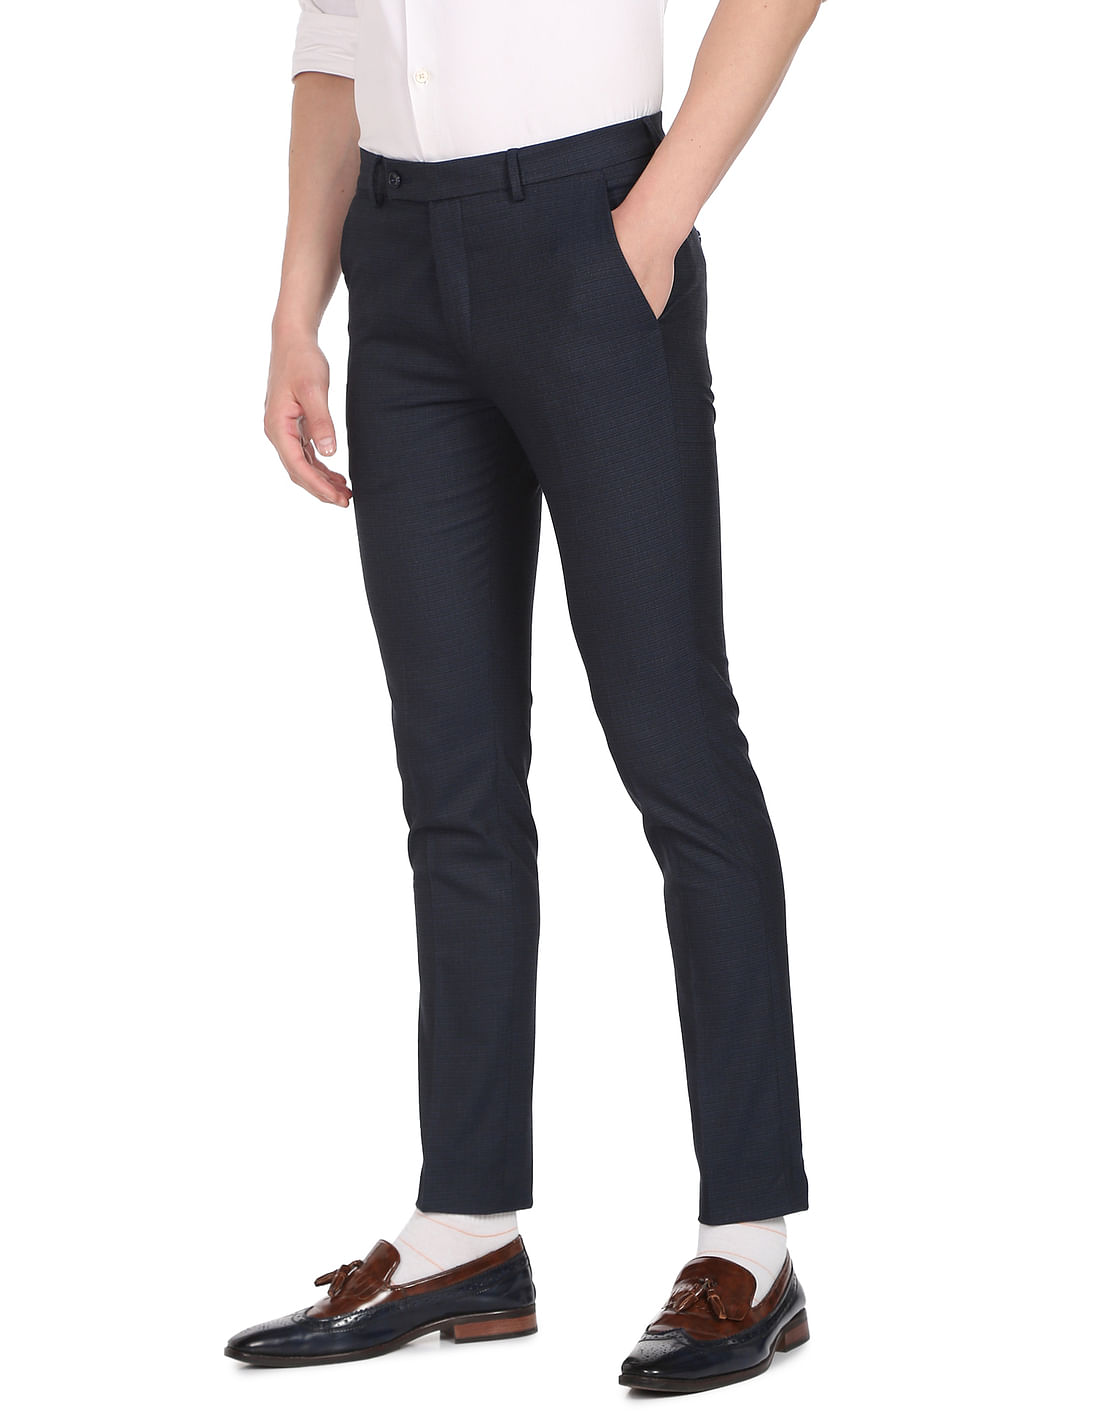 Men's Trousers | Trousers for Men | Very.co.uk